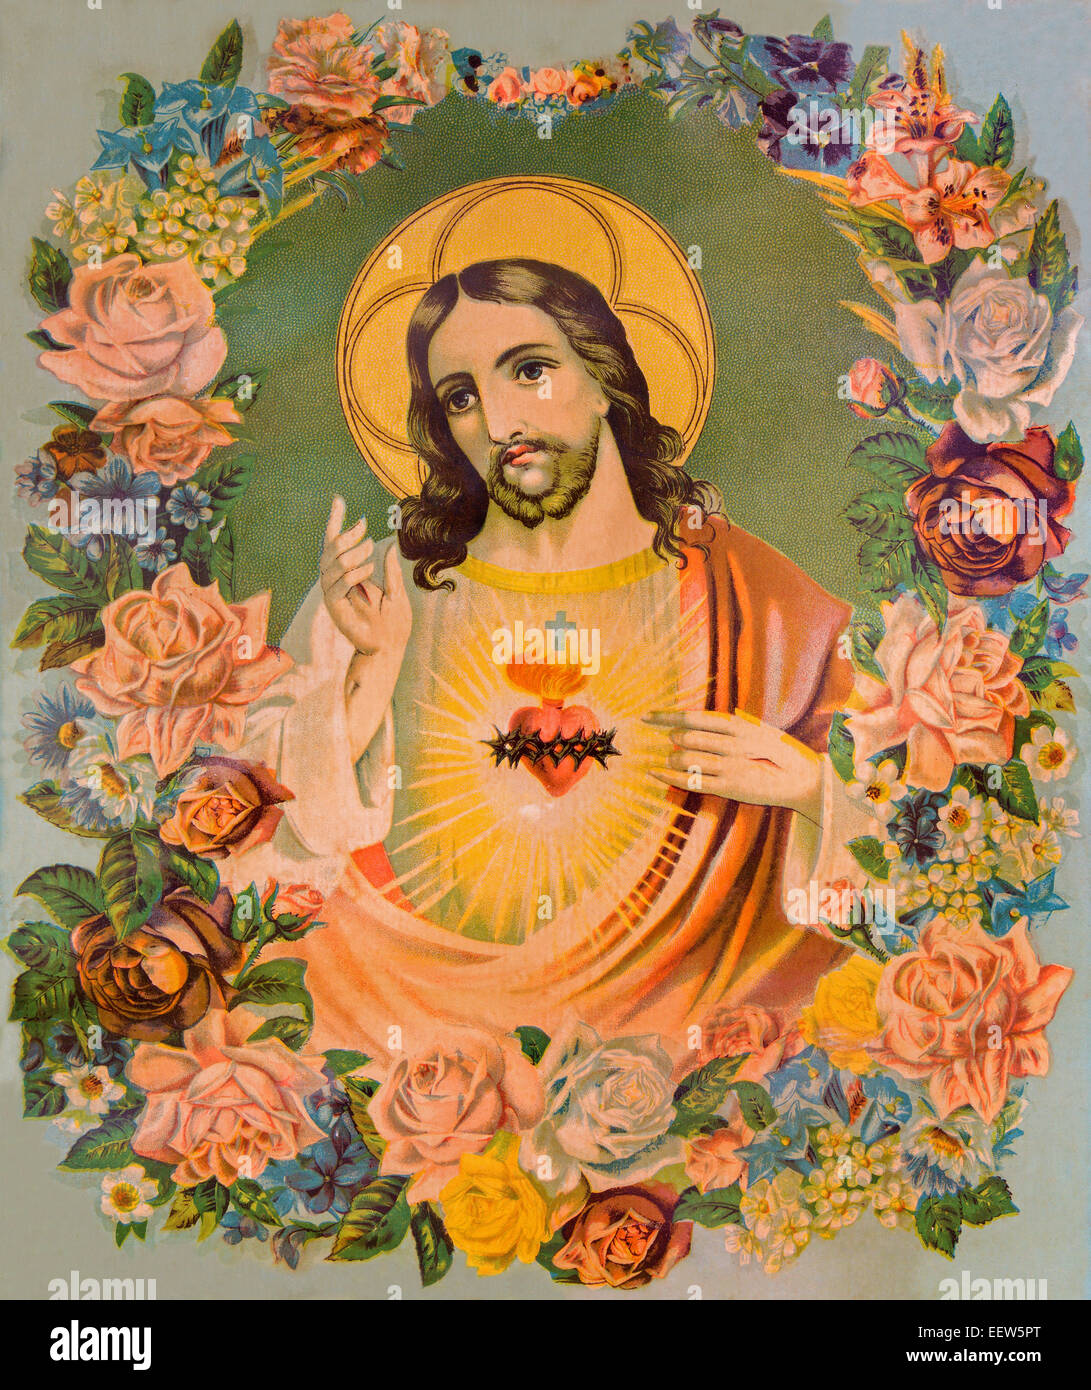 SEBECHLEBY, SLOVAKIA - JANUARY 6, 2015: Typical catholic image of heart of Jesus Christ in the flowers from Slovakia Stock Photo